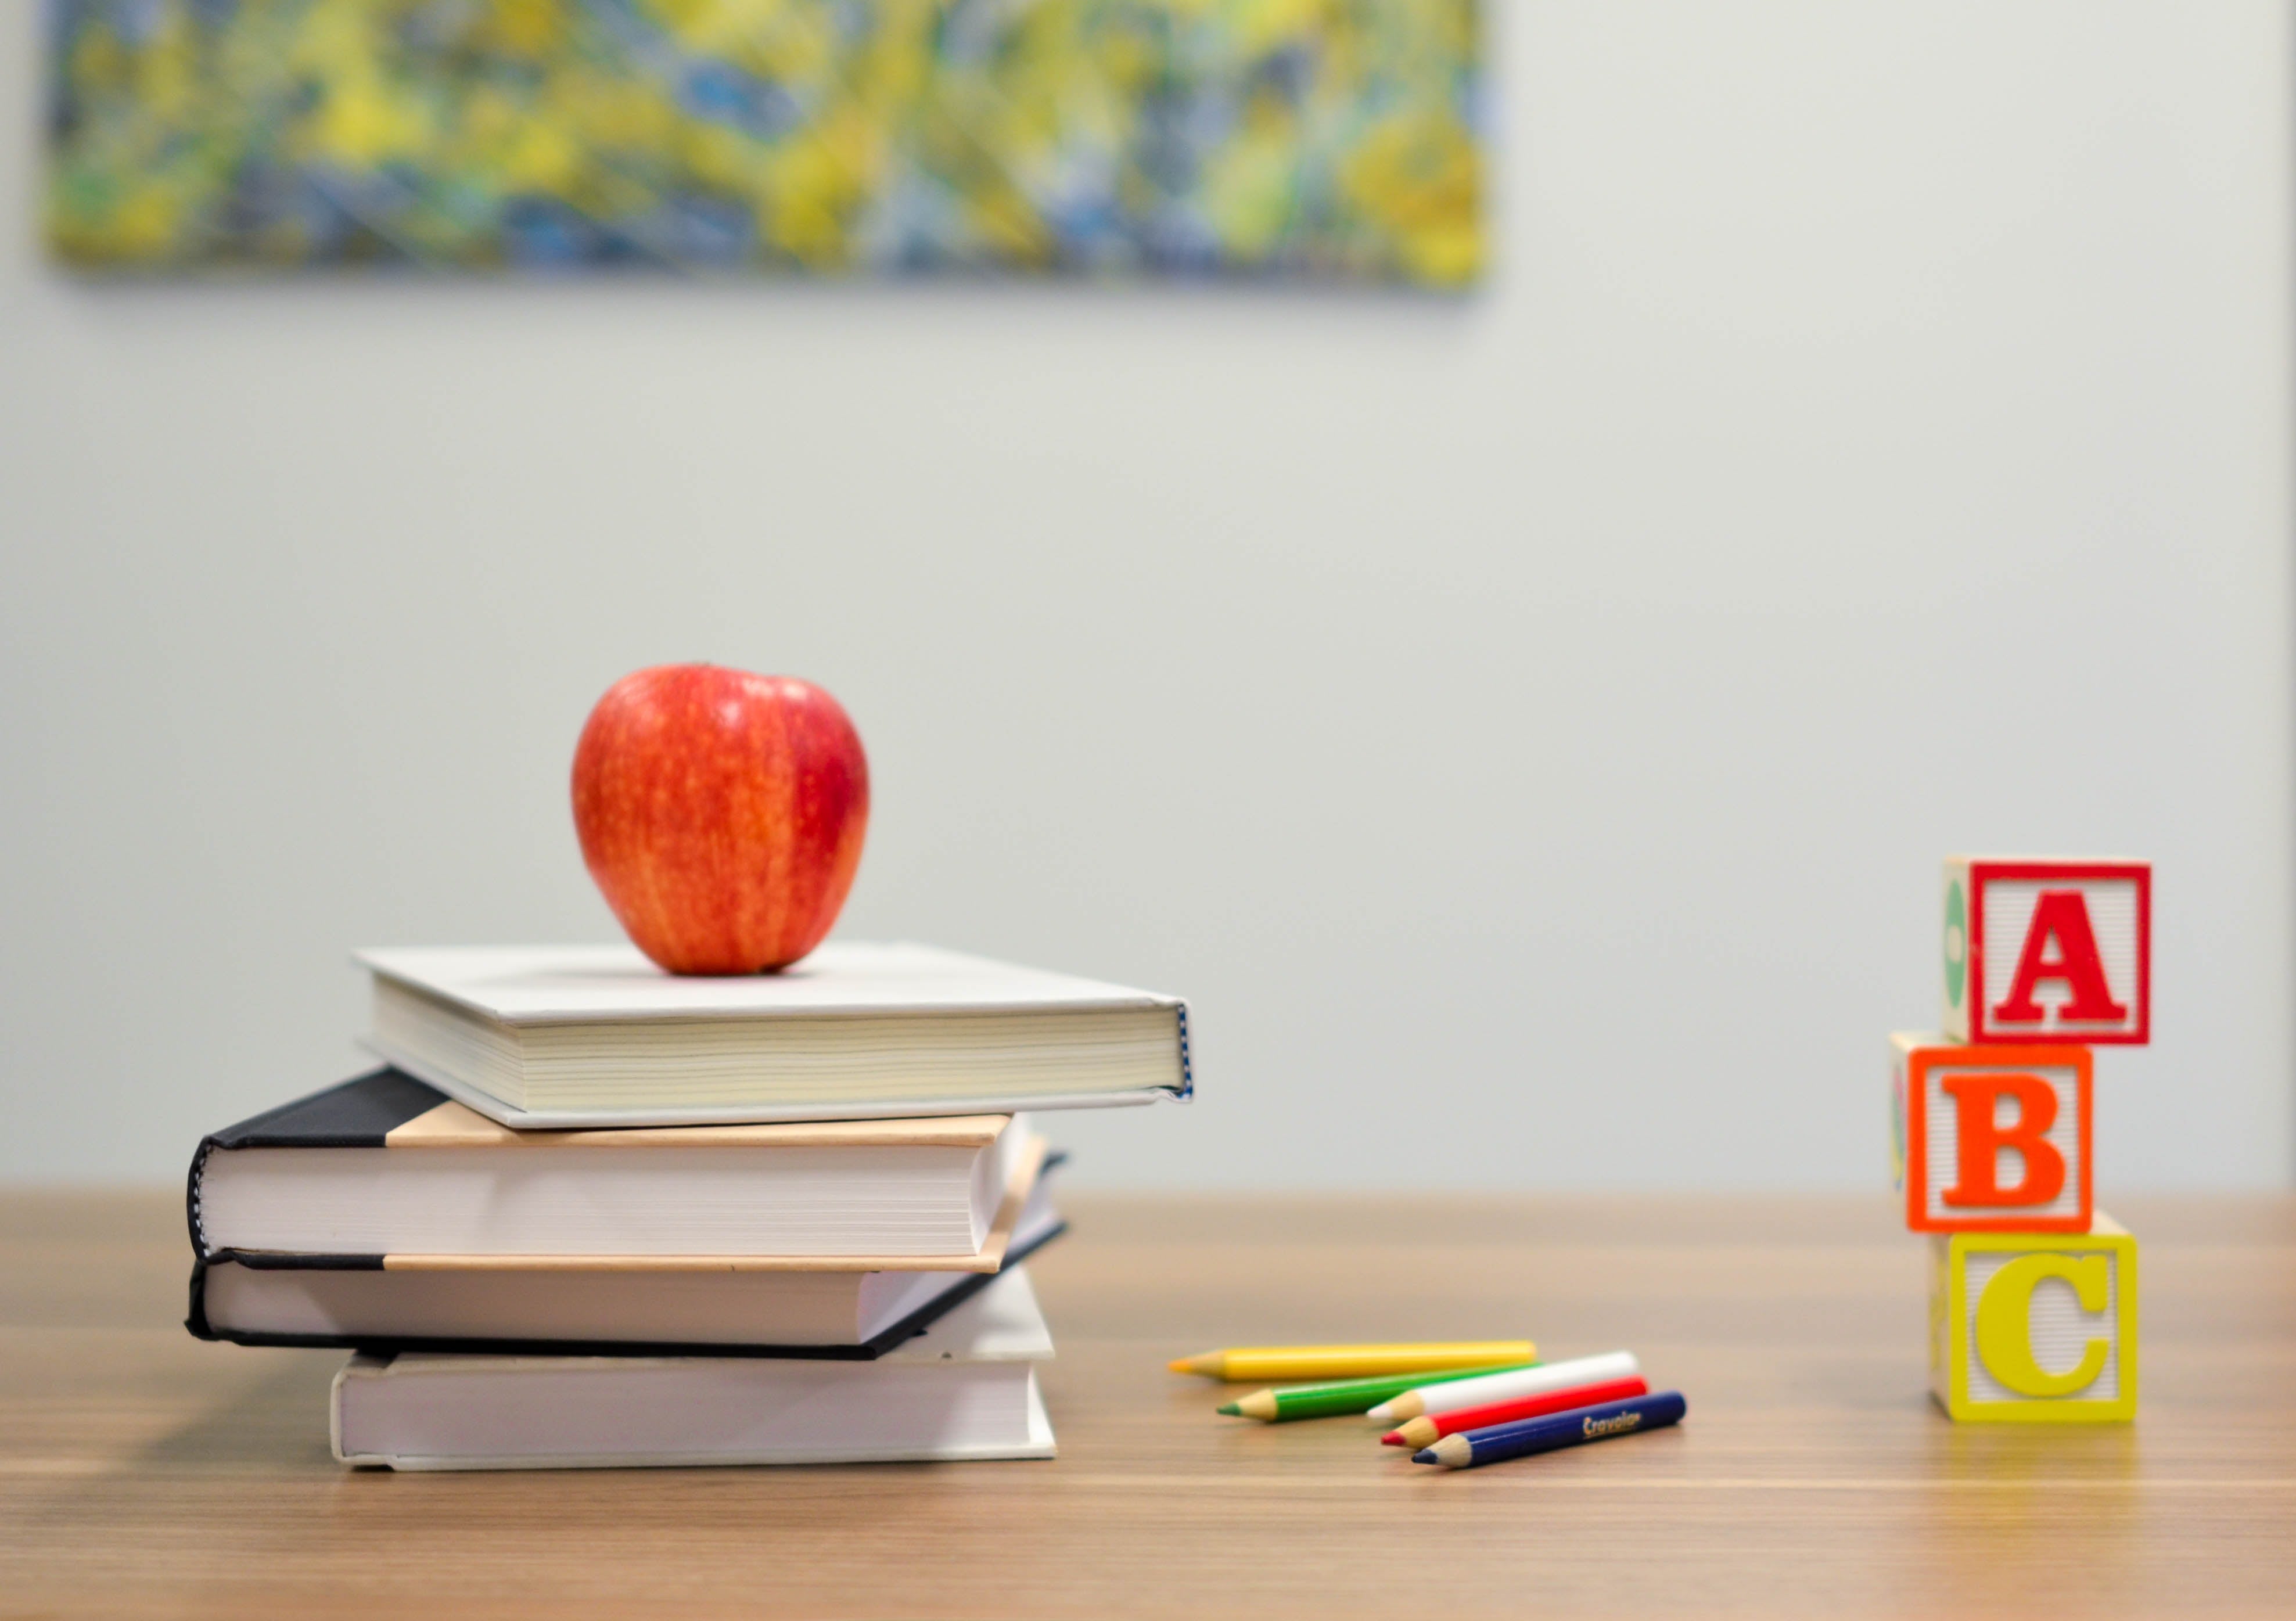 5 Benefits of Two-Way Radios for Education